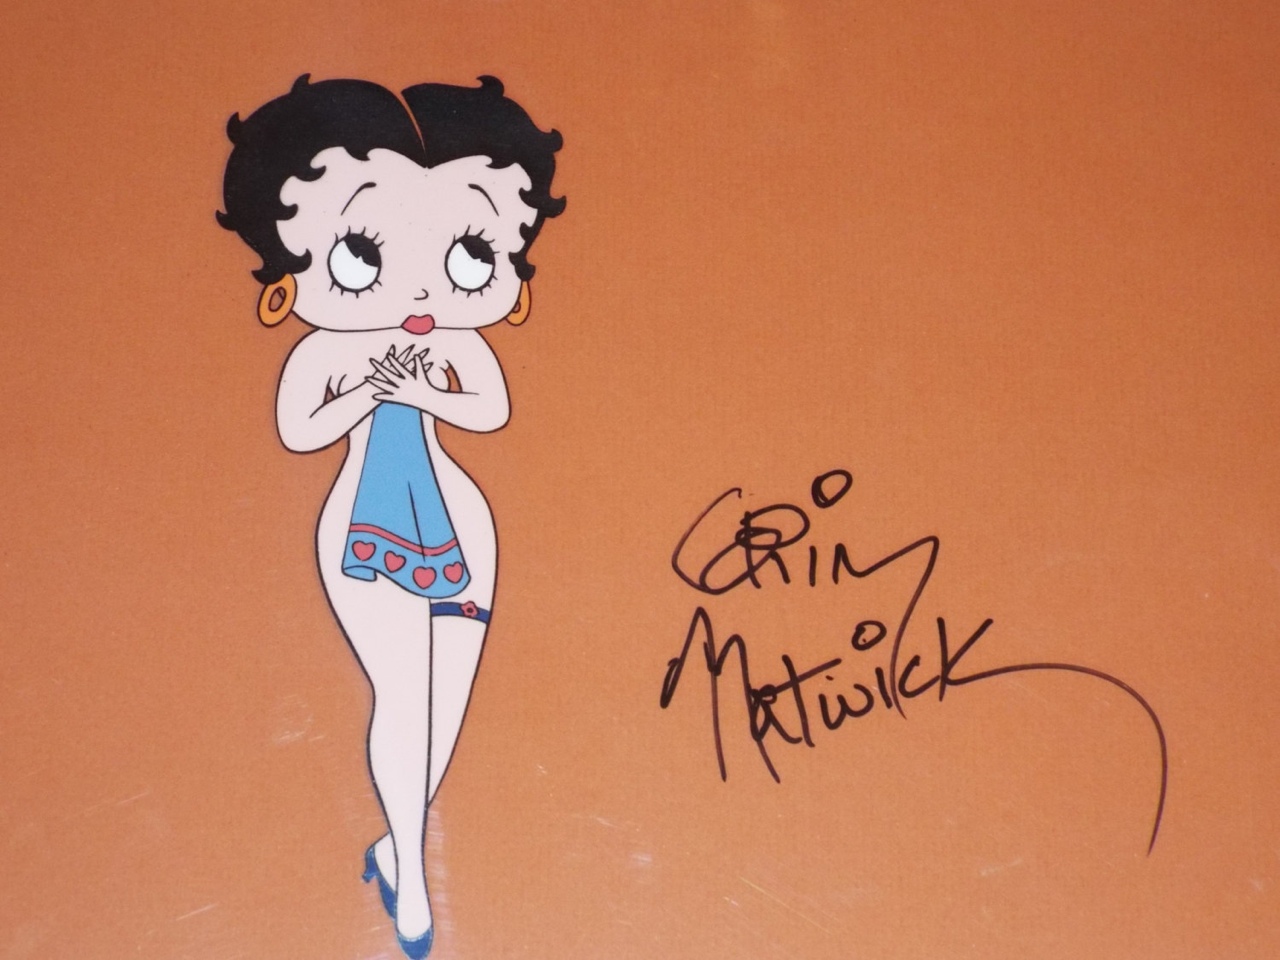 To celebrate Betty Boop's 88th birthday, let's have a Betty Boop ...